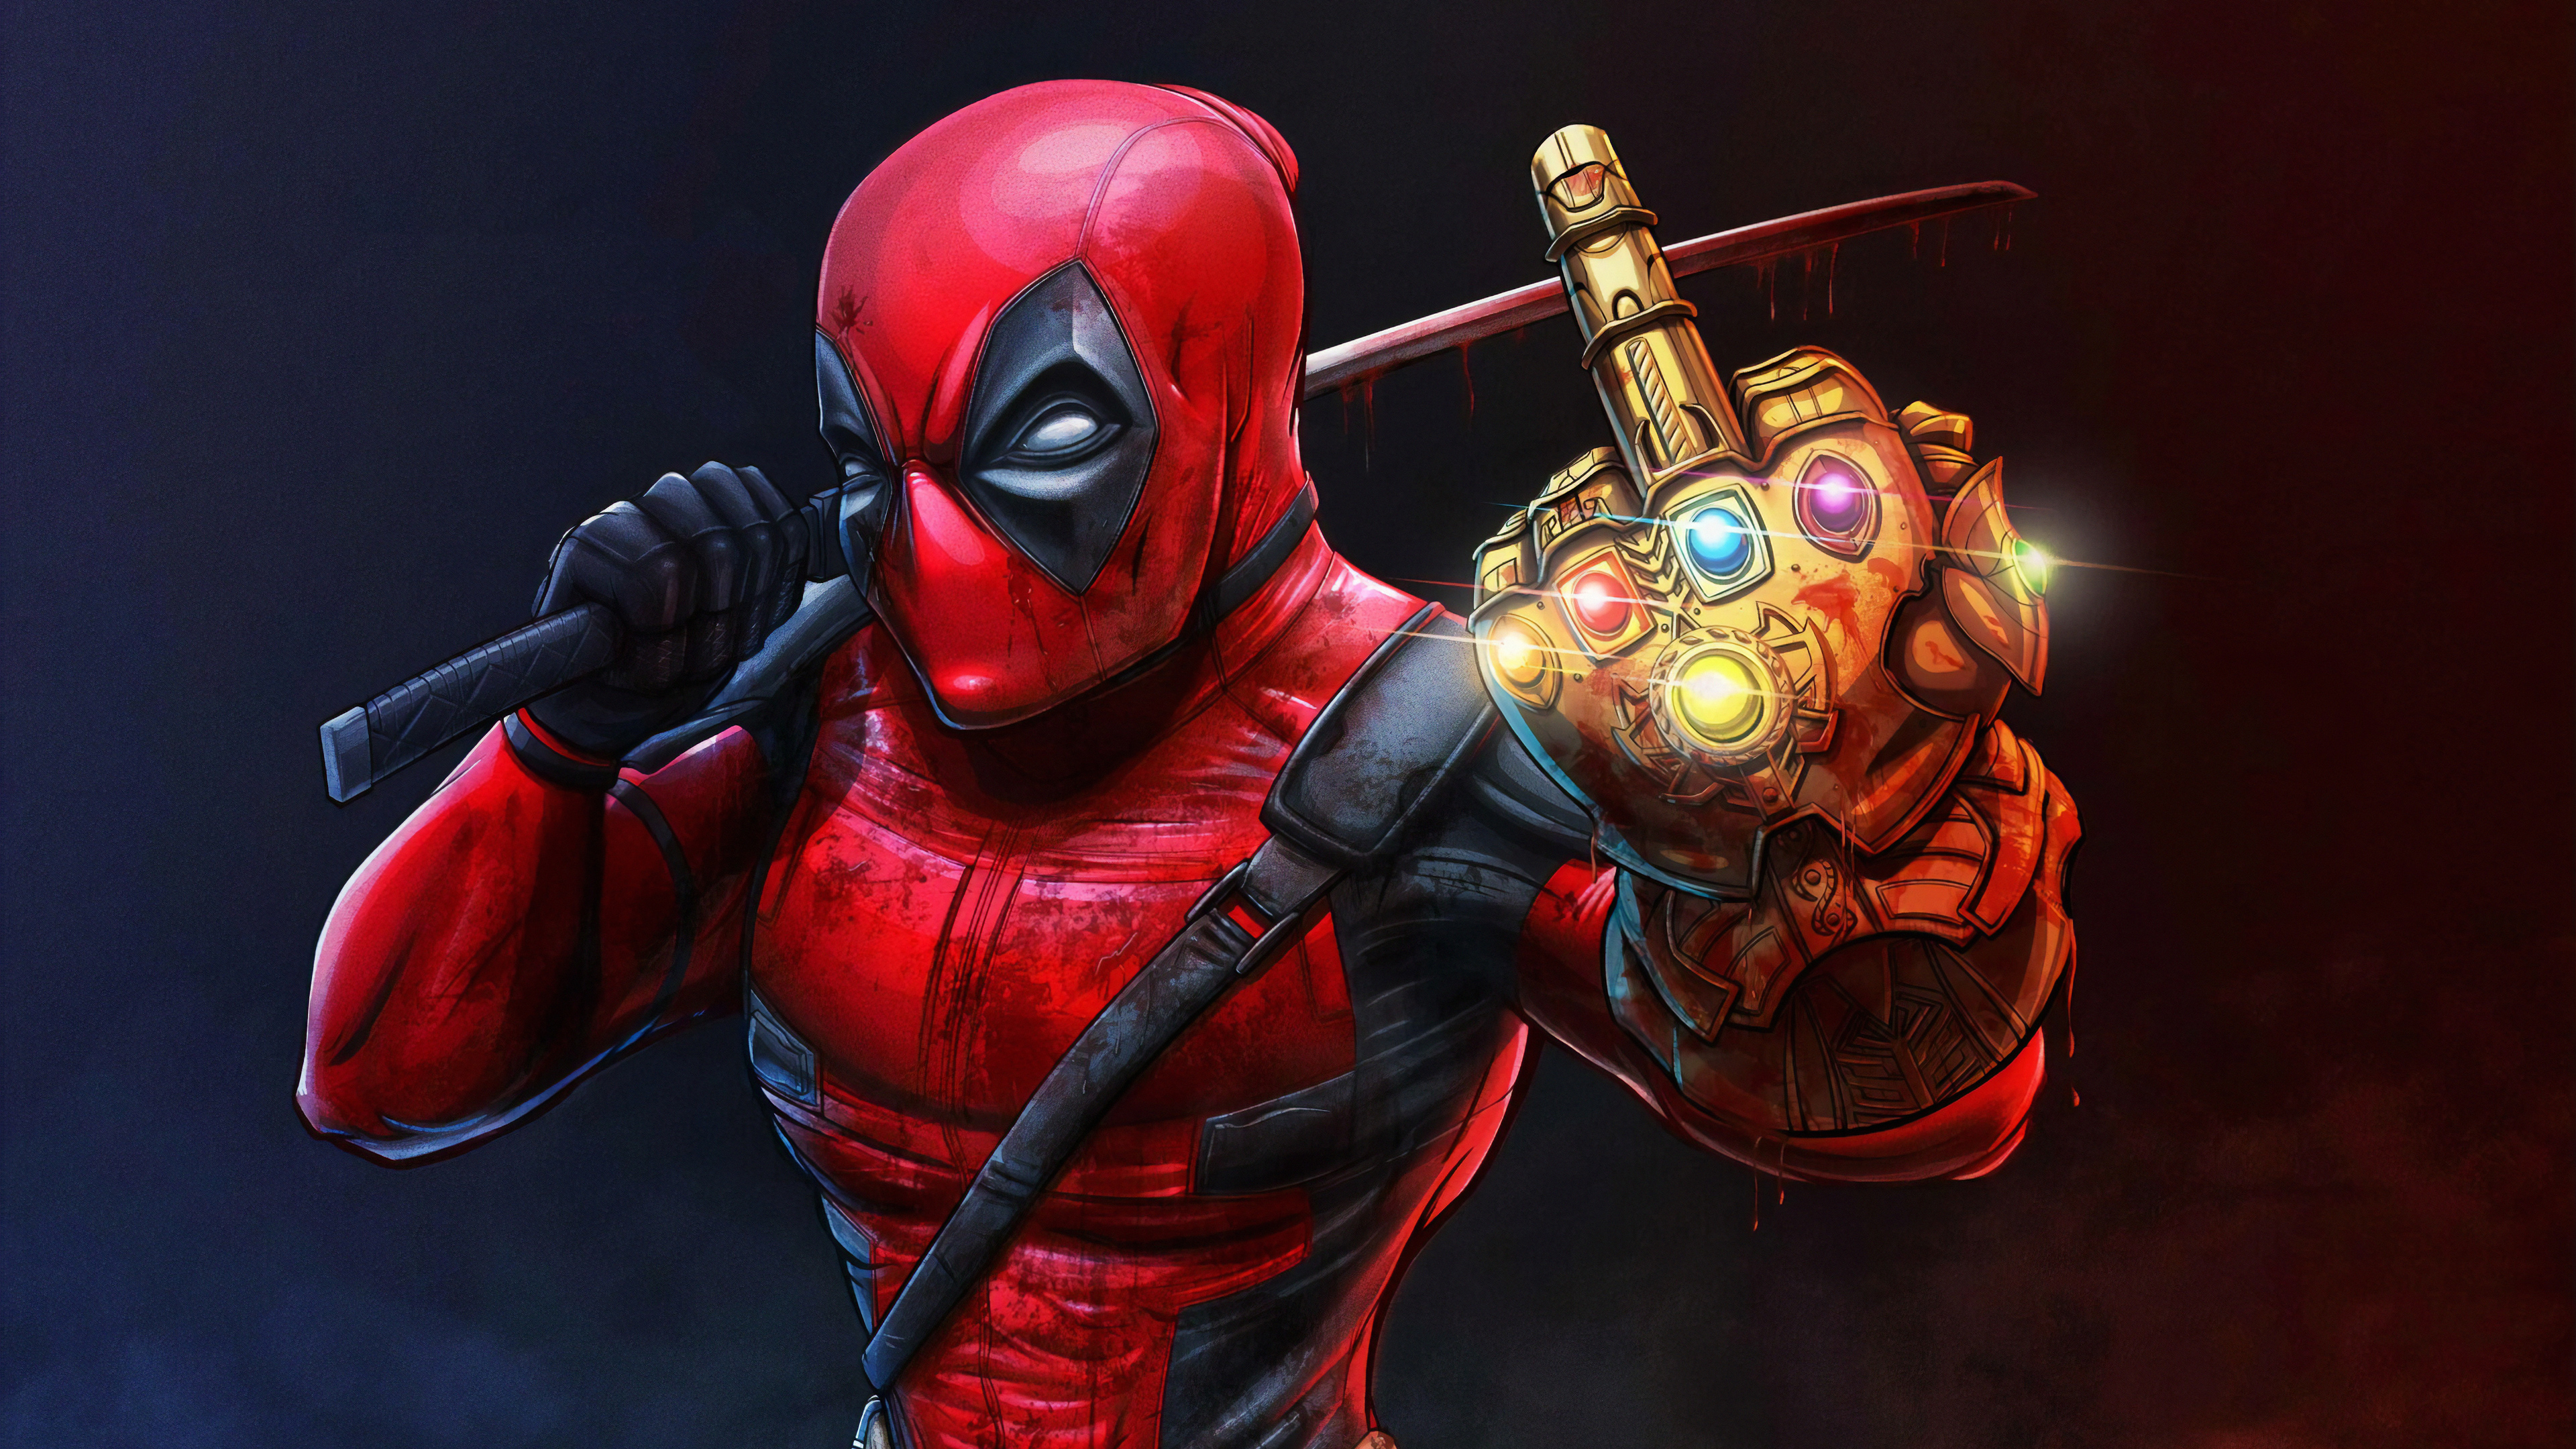 Deadpool Wallpaper Deadpool With Thanos Infinity Gauntlet - Deadpool Thanos Wallpaper 4k , HD Wallpaper & Backgrounds